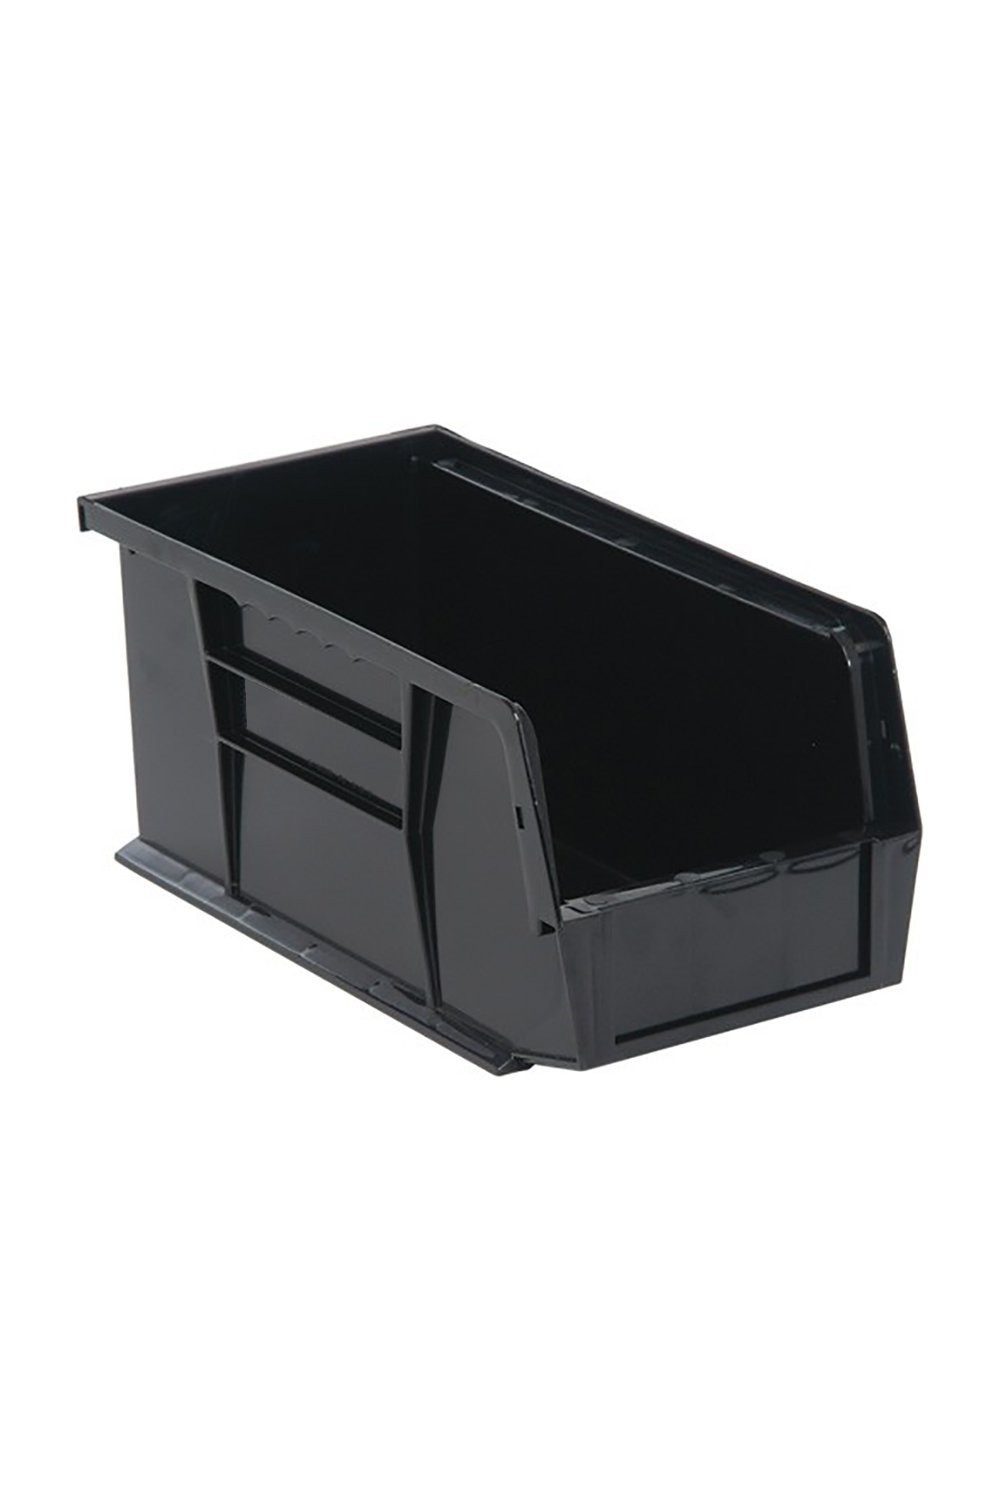 Recycled Ultra Hang and Stack Bin Bins & Containers Acart 10-7/8"L x 5-1/2"W x 5"H Black 